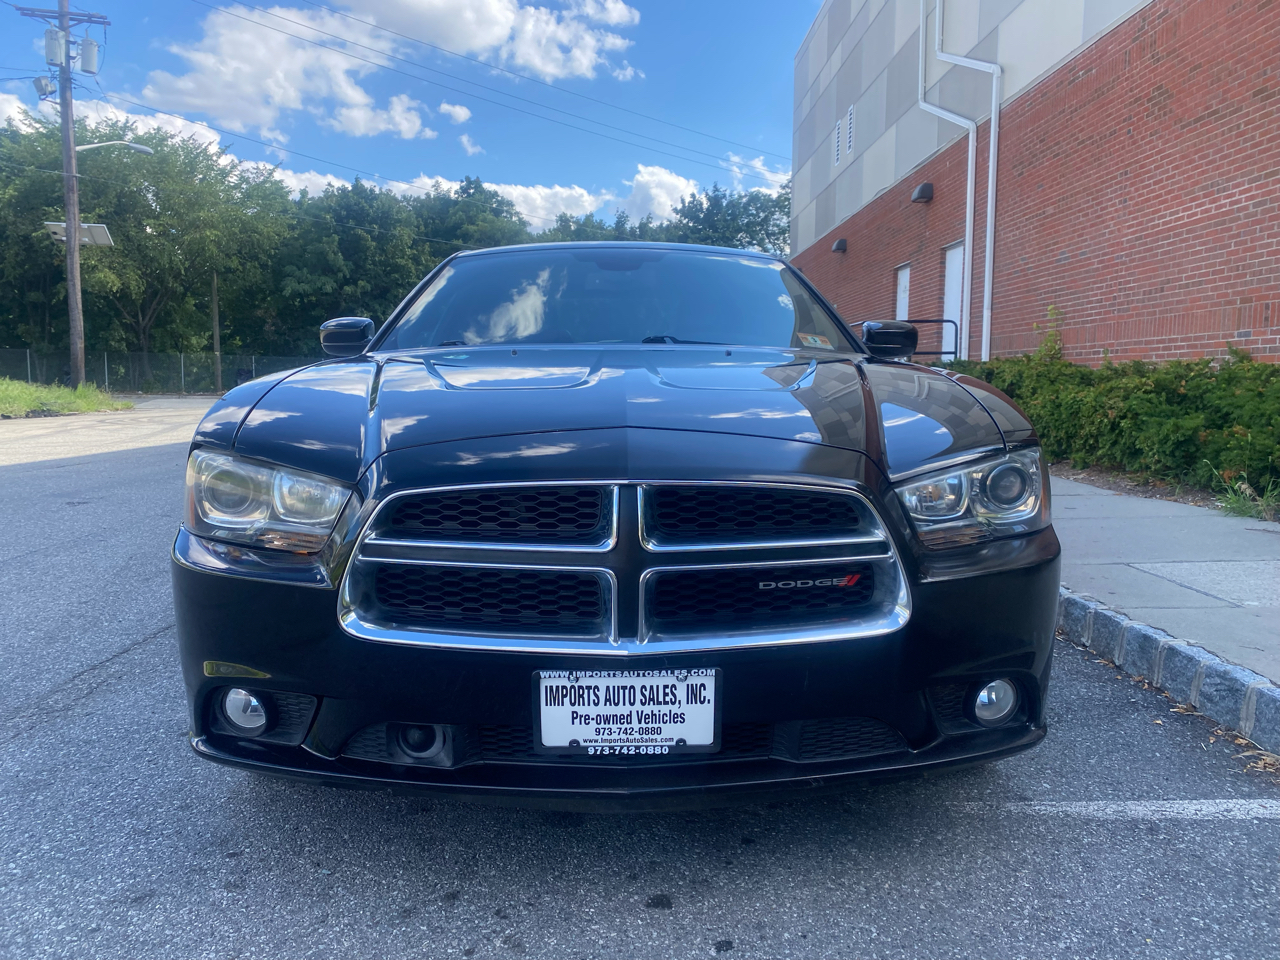 Used Dodge Charger Paterson Nj